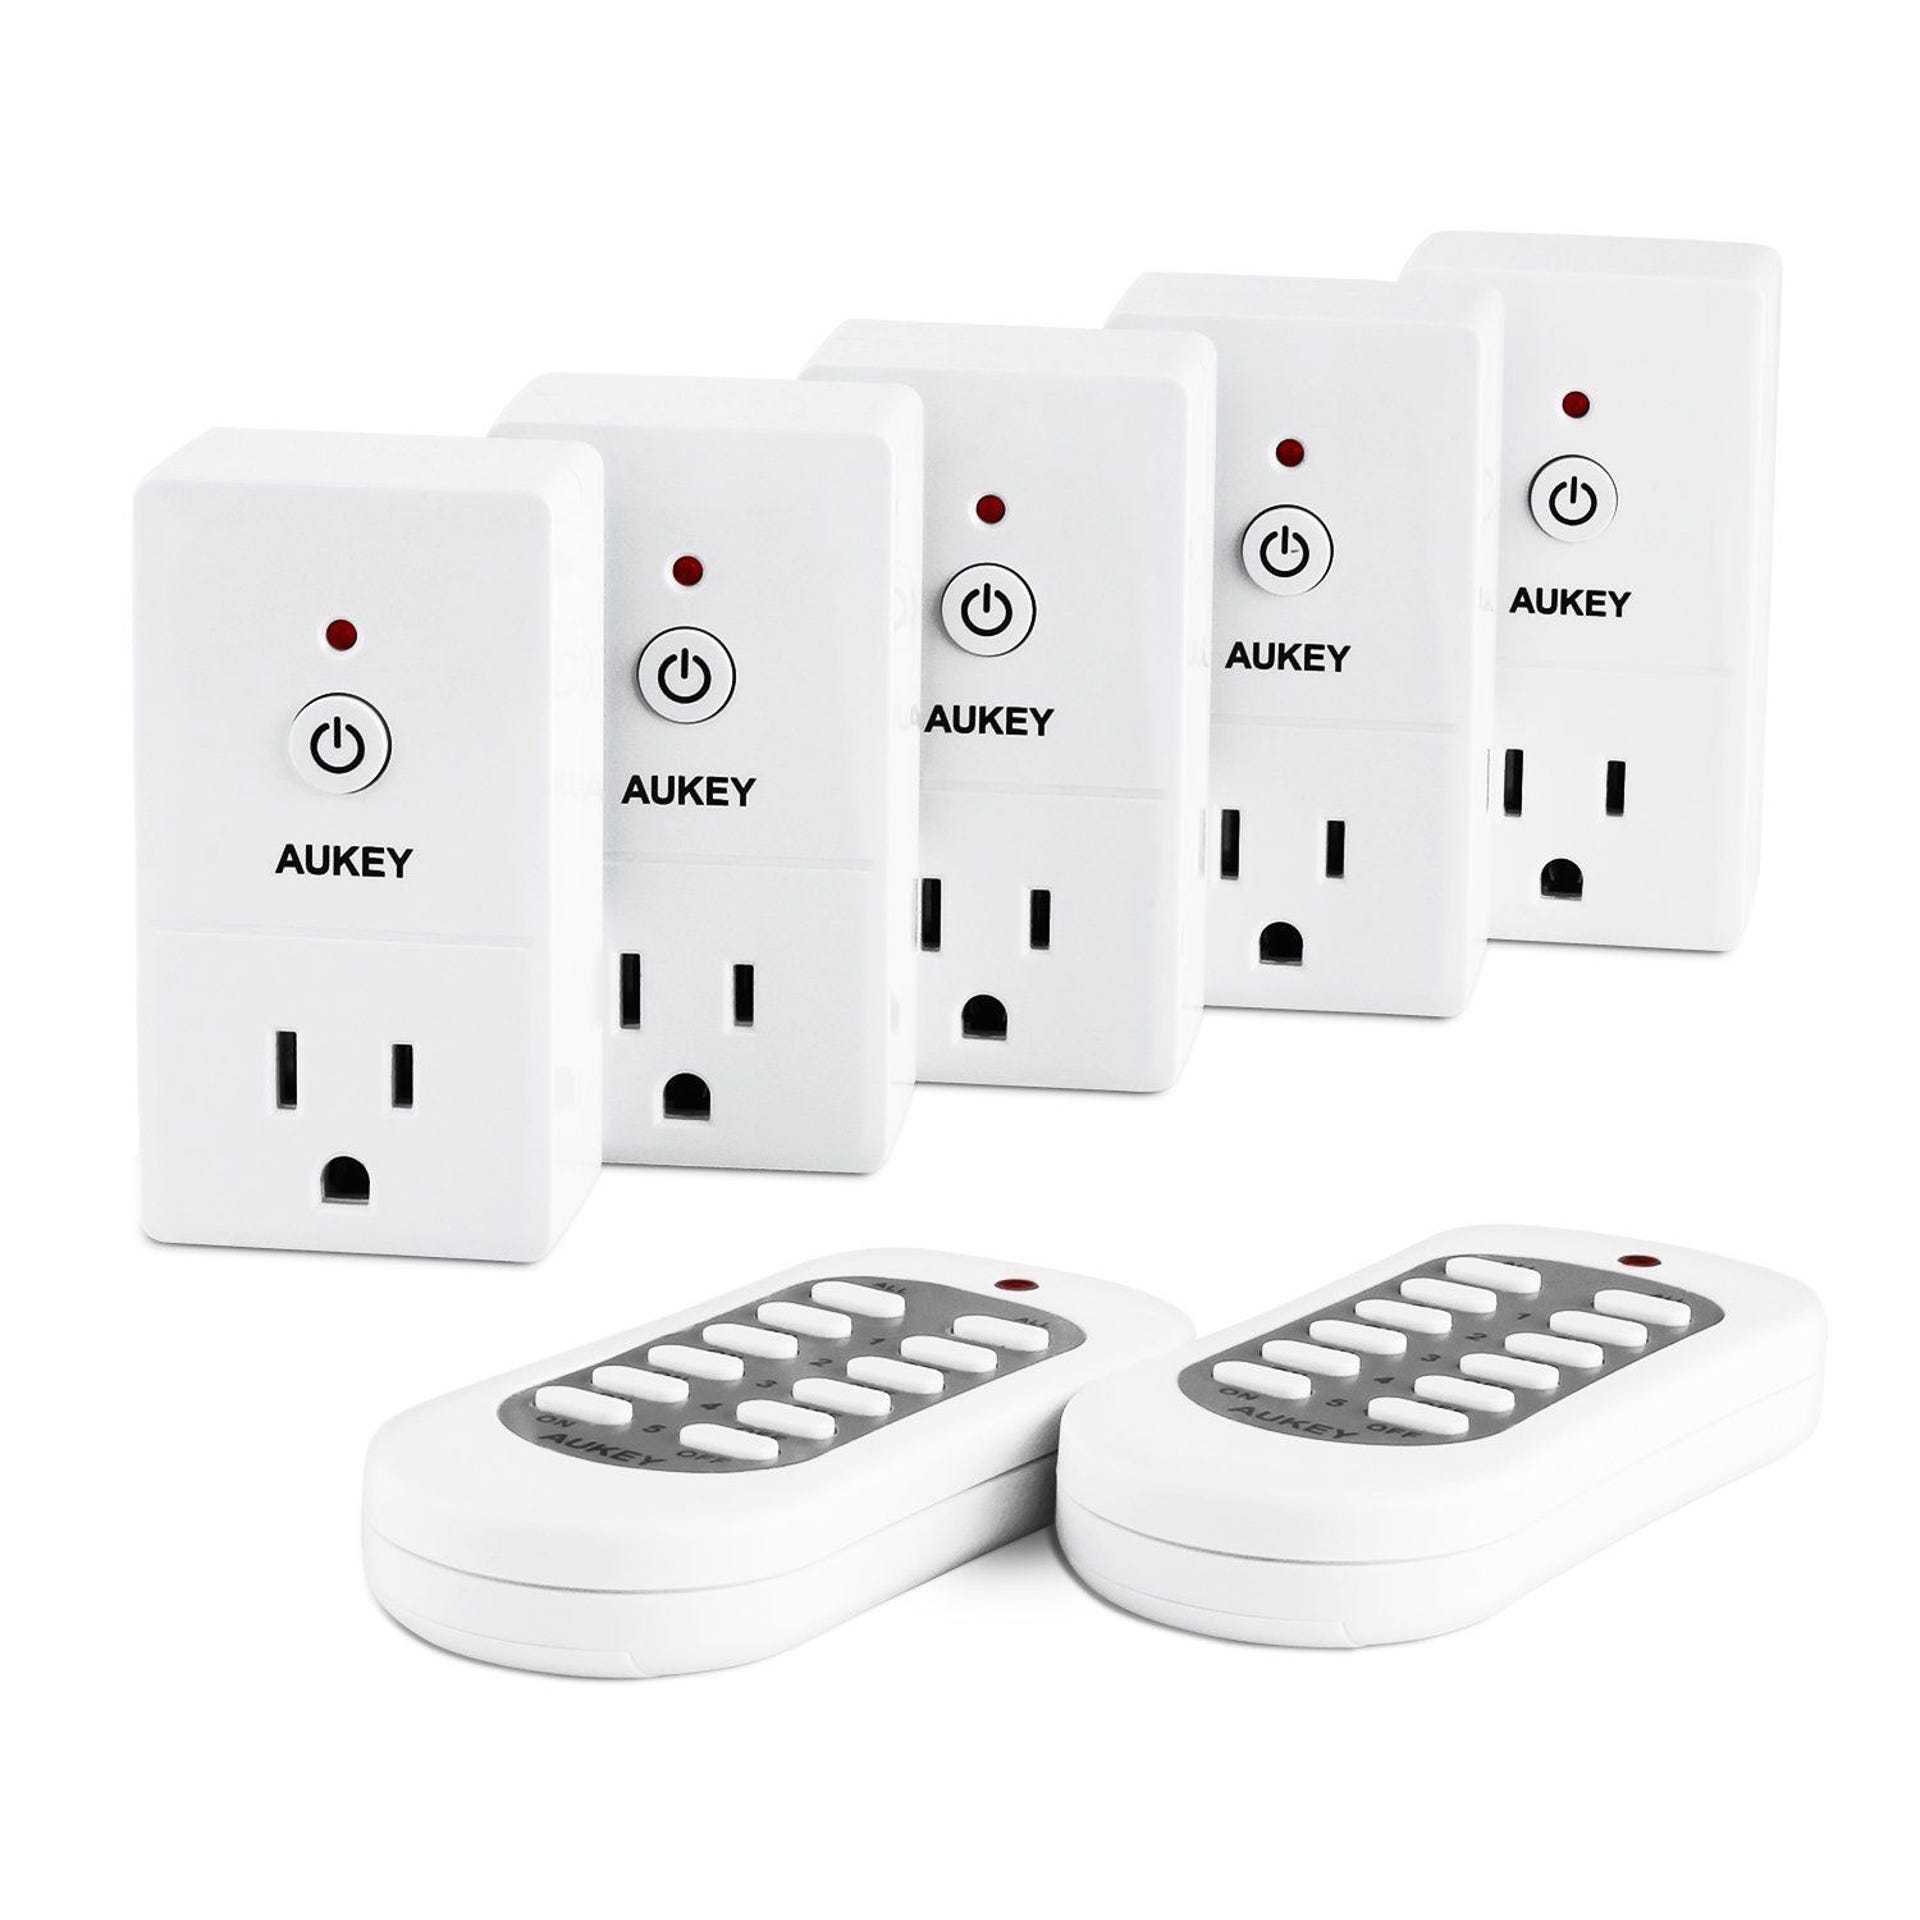 aukey-remote-outlets.jpg